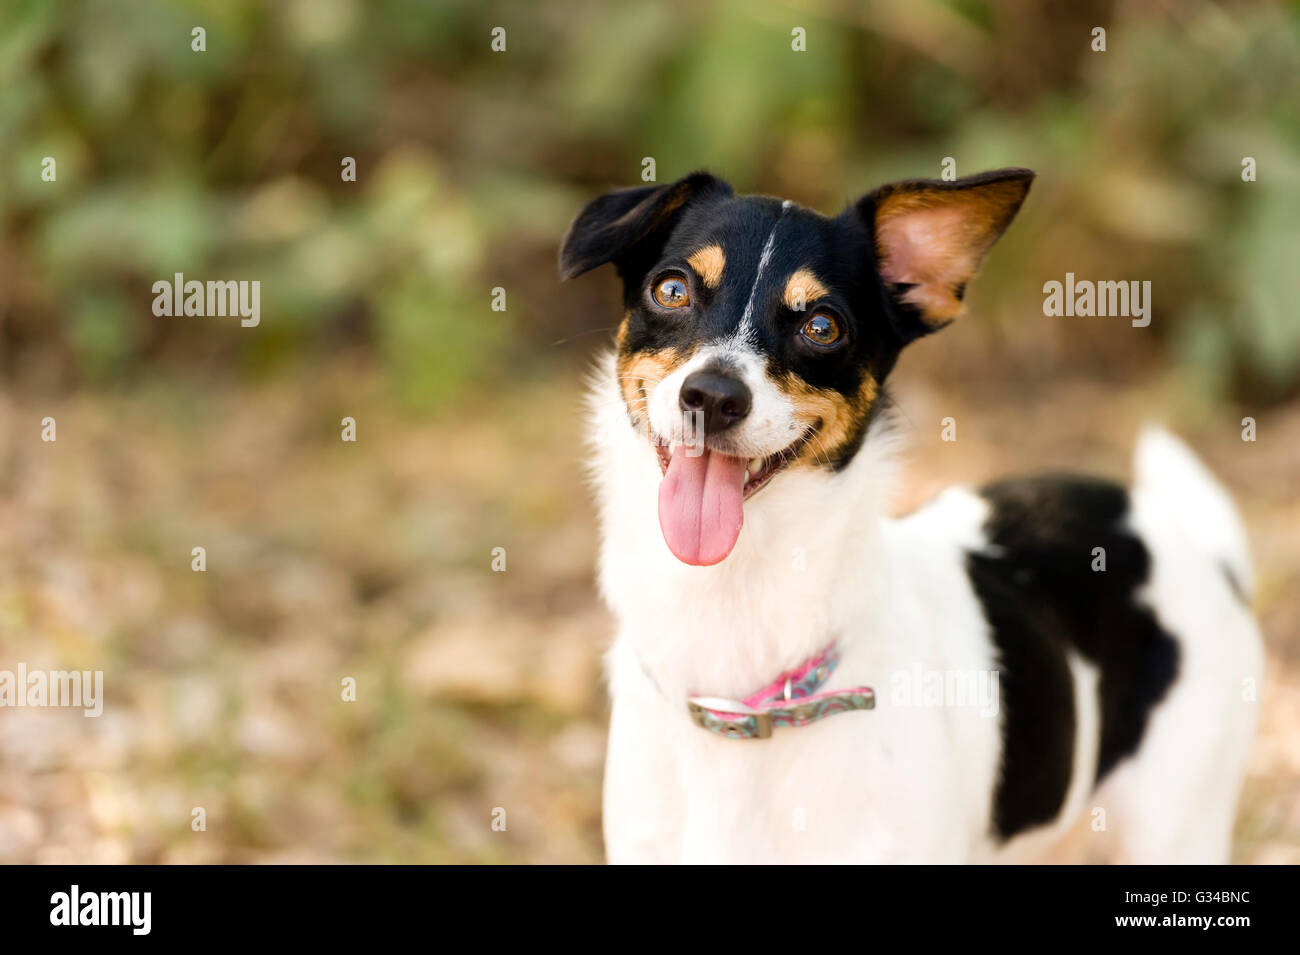 Funny dog is a crazy silly looking playful dog making a funny face while enjoying himself outdoors. Stock Photo